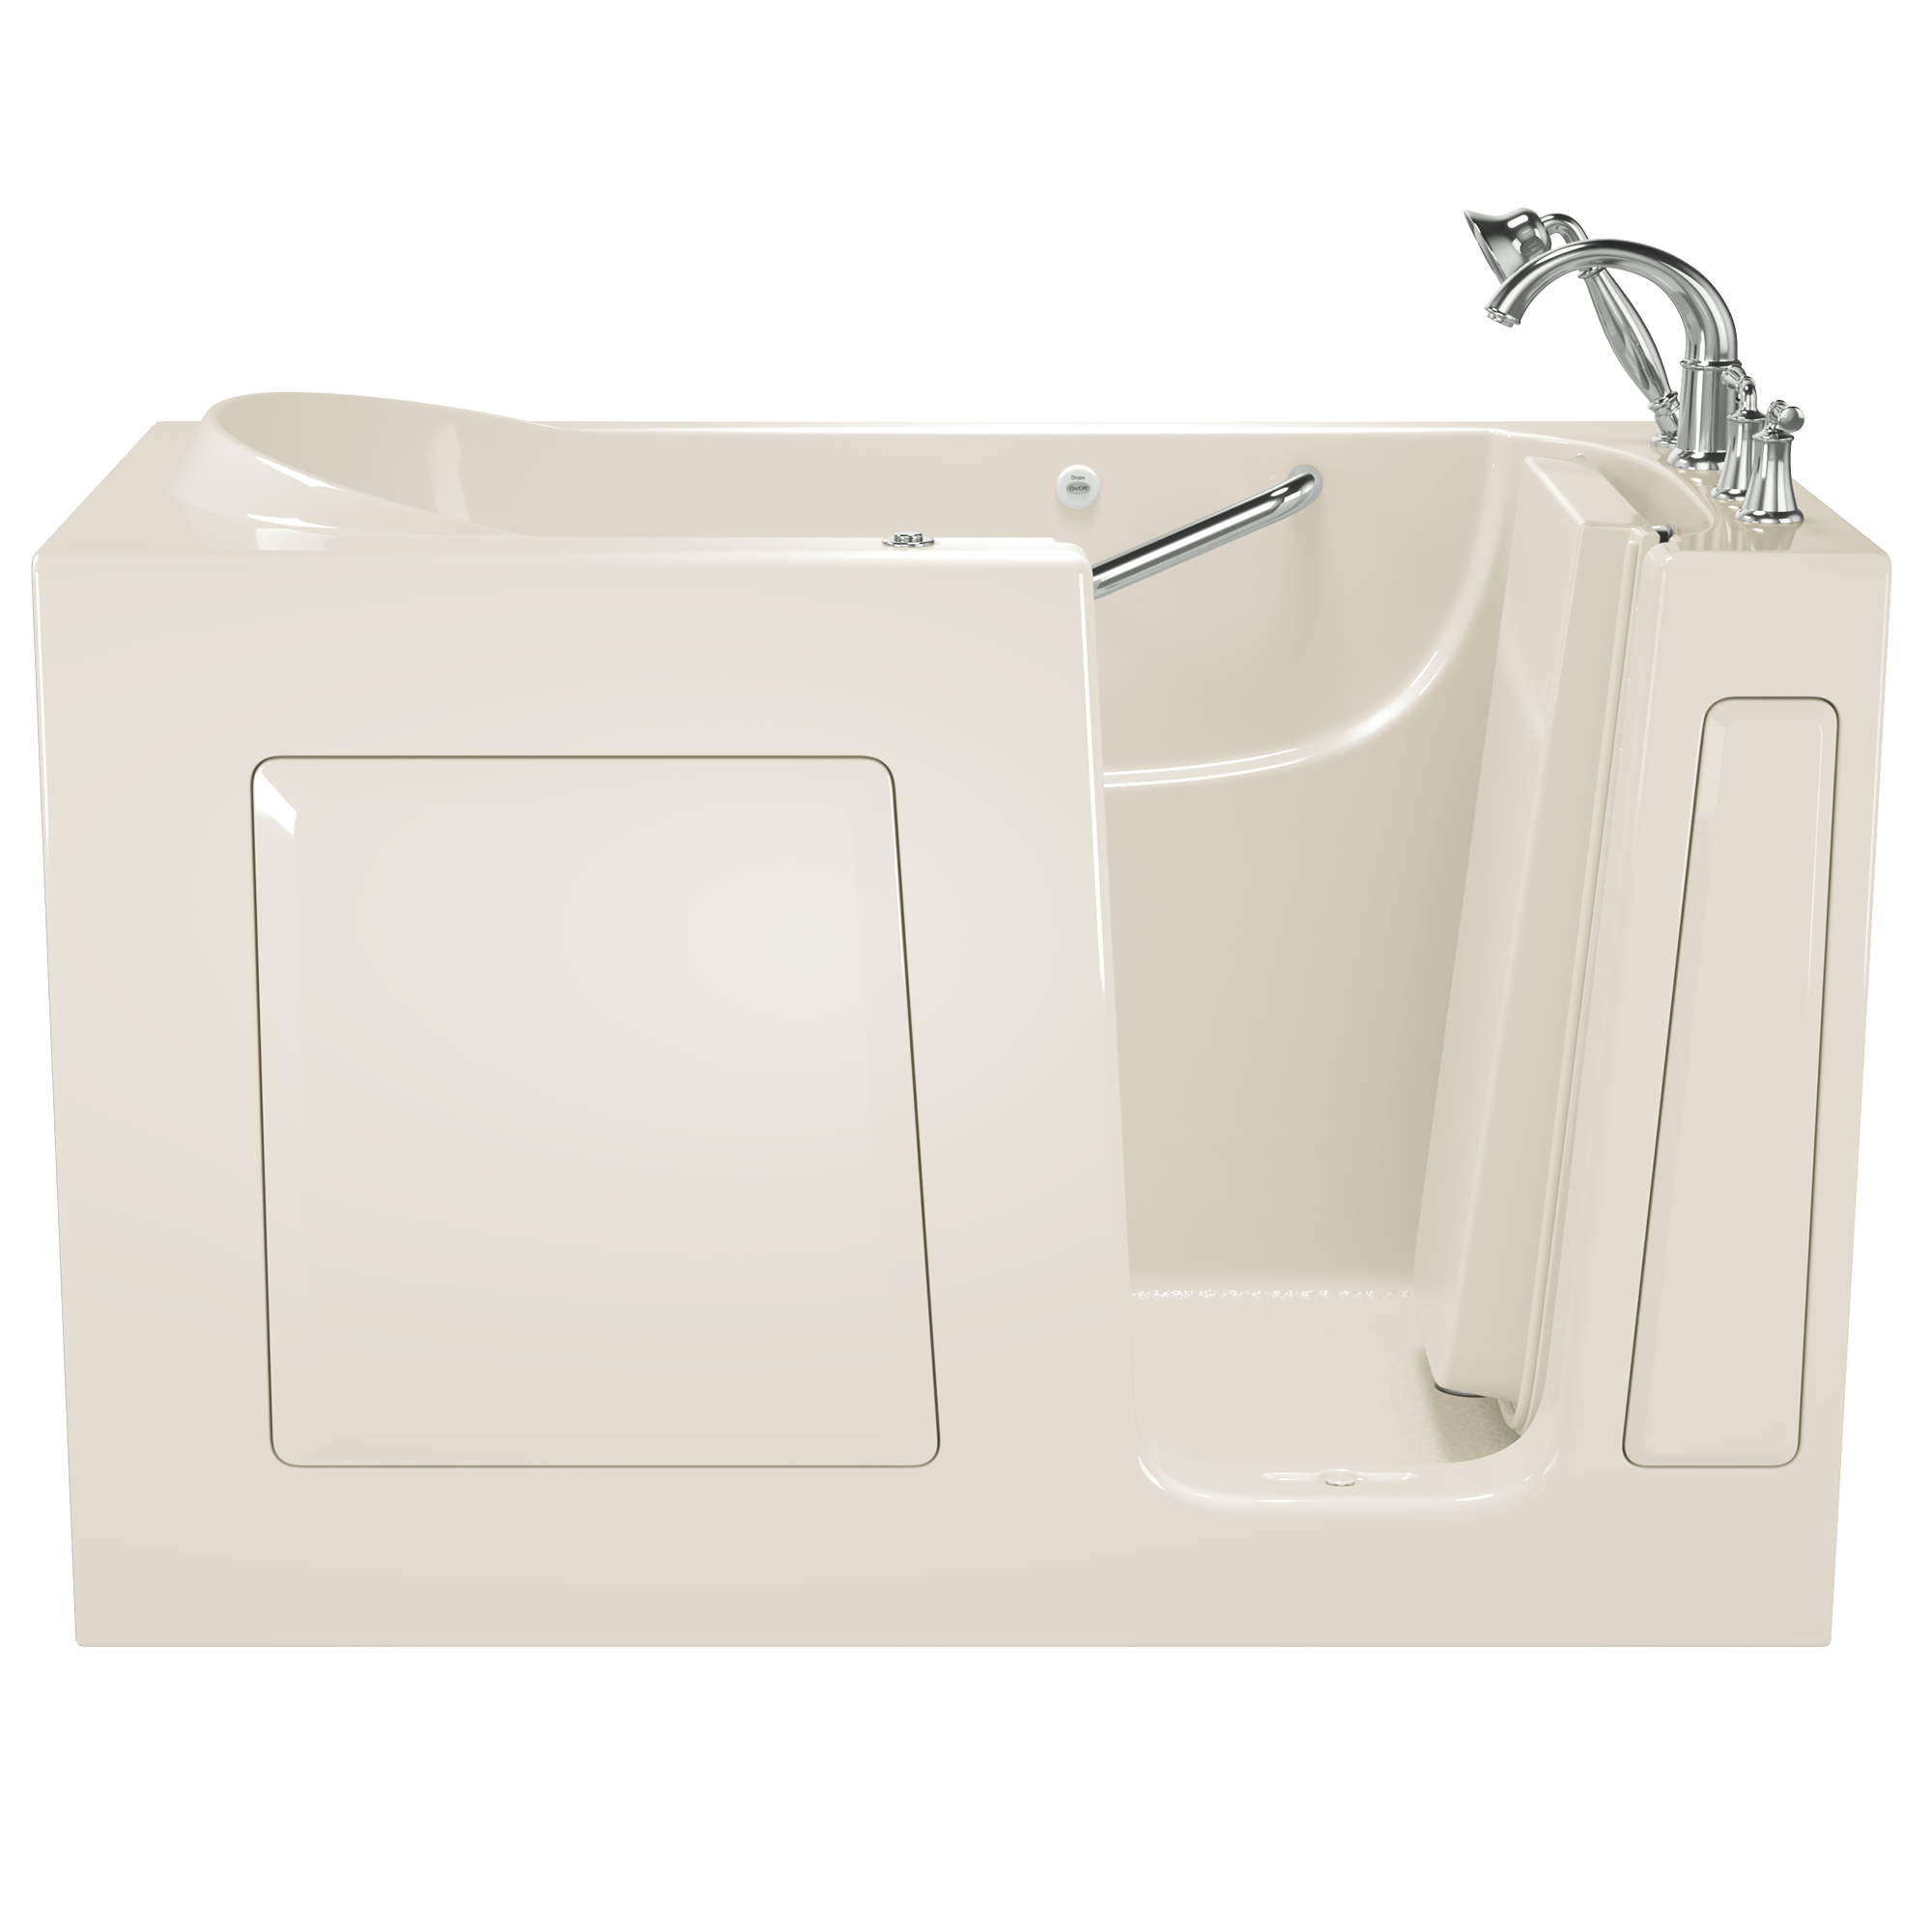 Gelcoat Value Series 60x30-Inch Walk-In Bathtub with Whirlpool Massage System - Right Hand Door and Drain